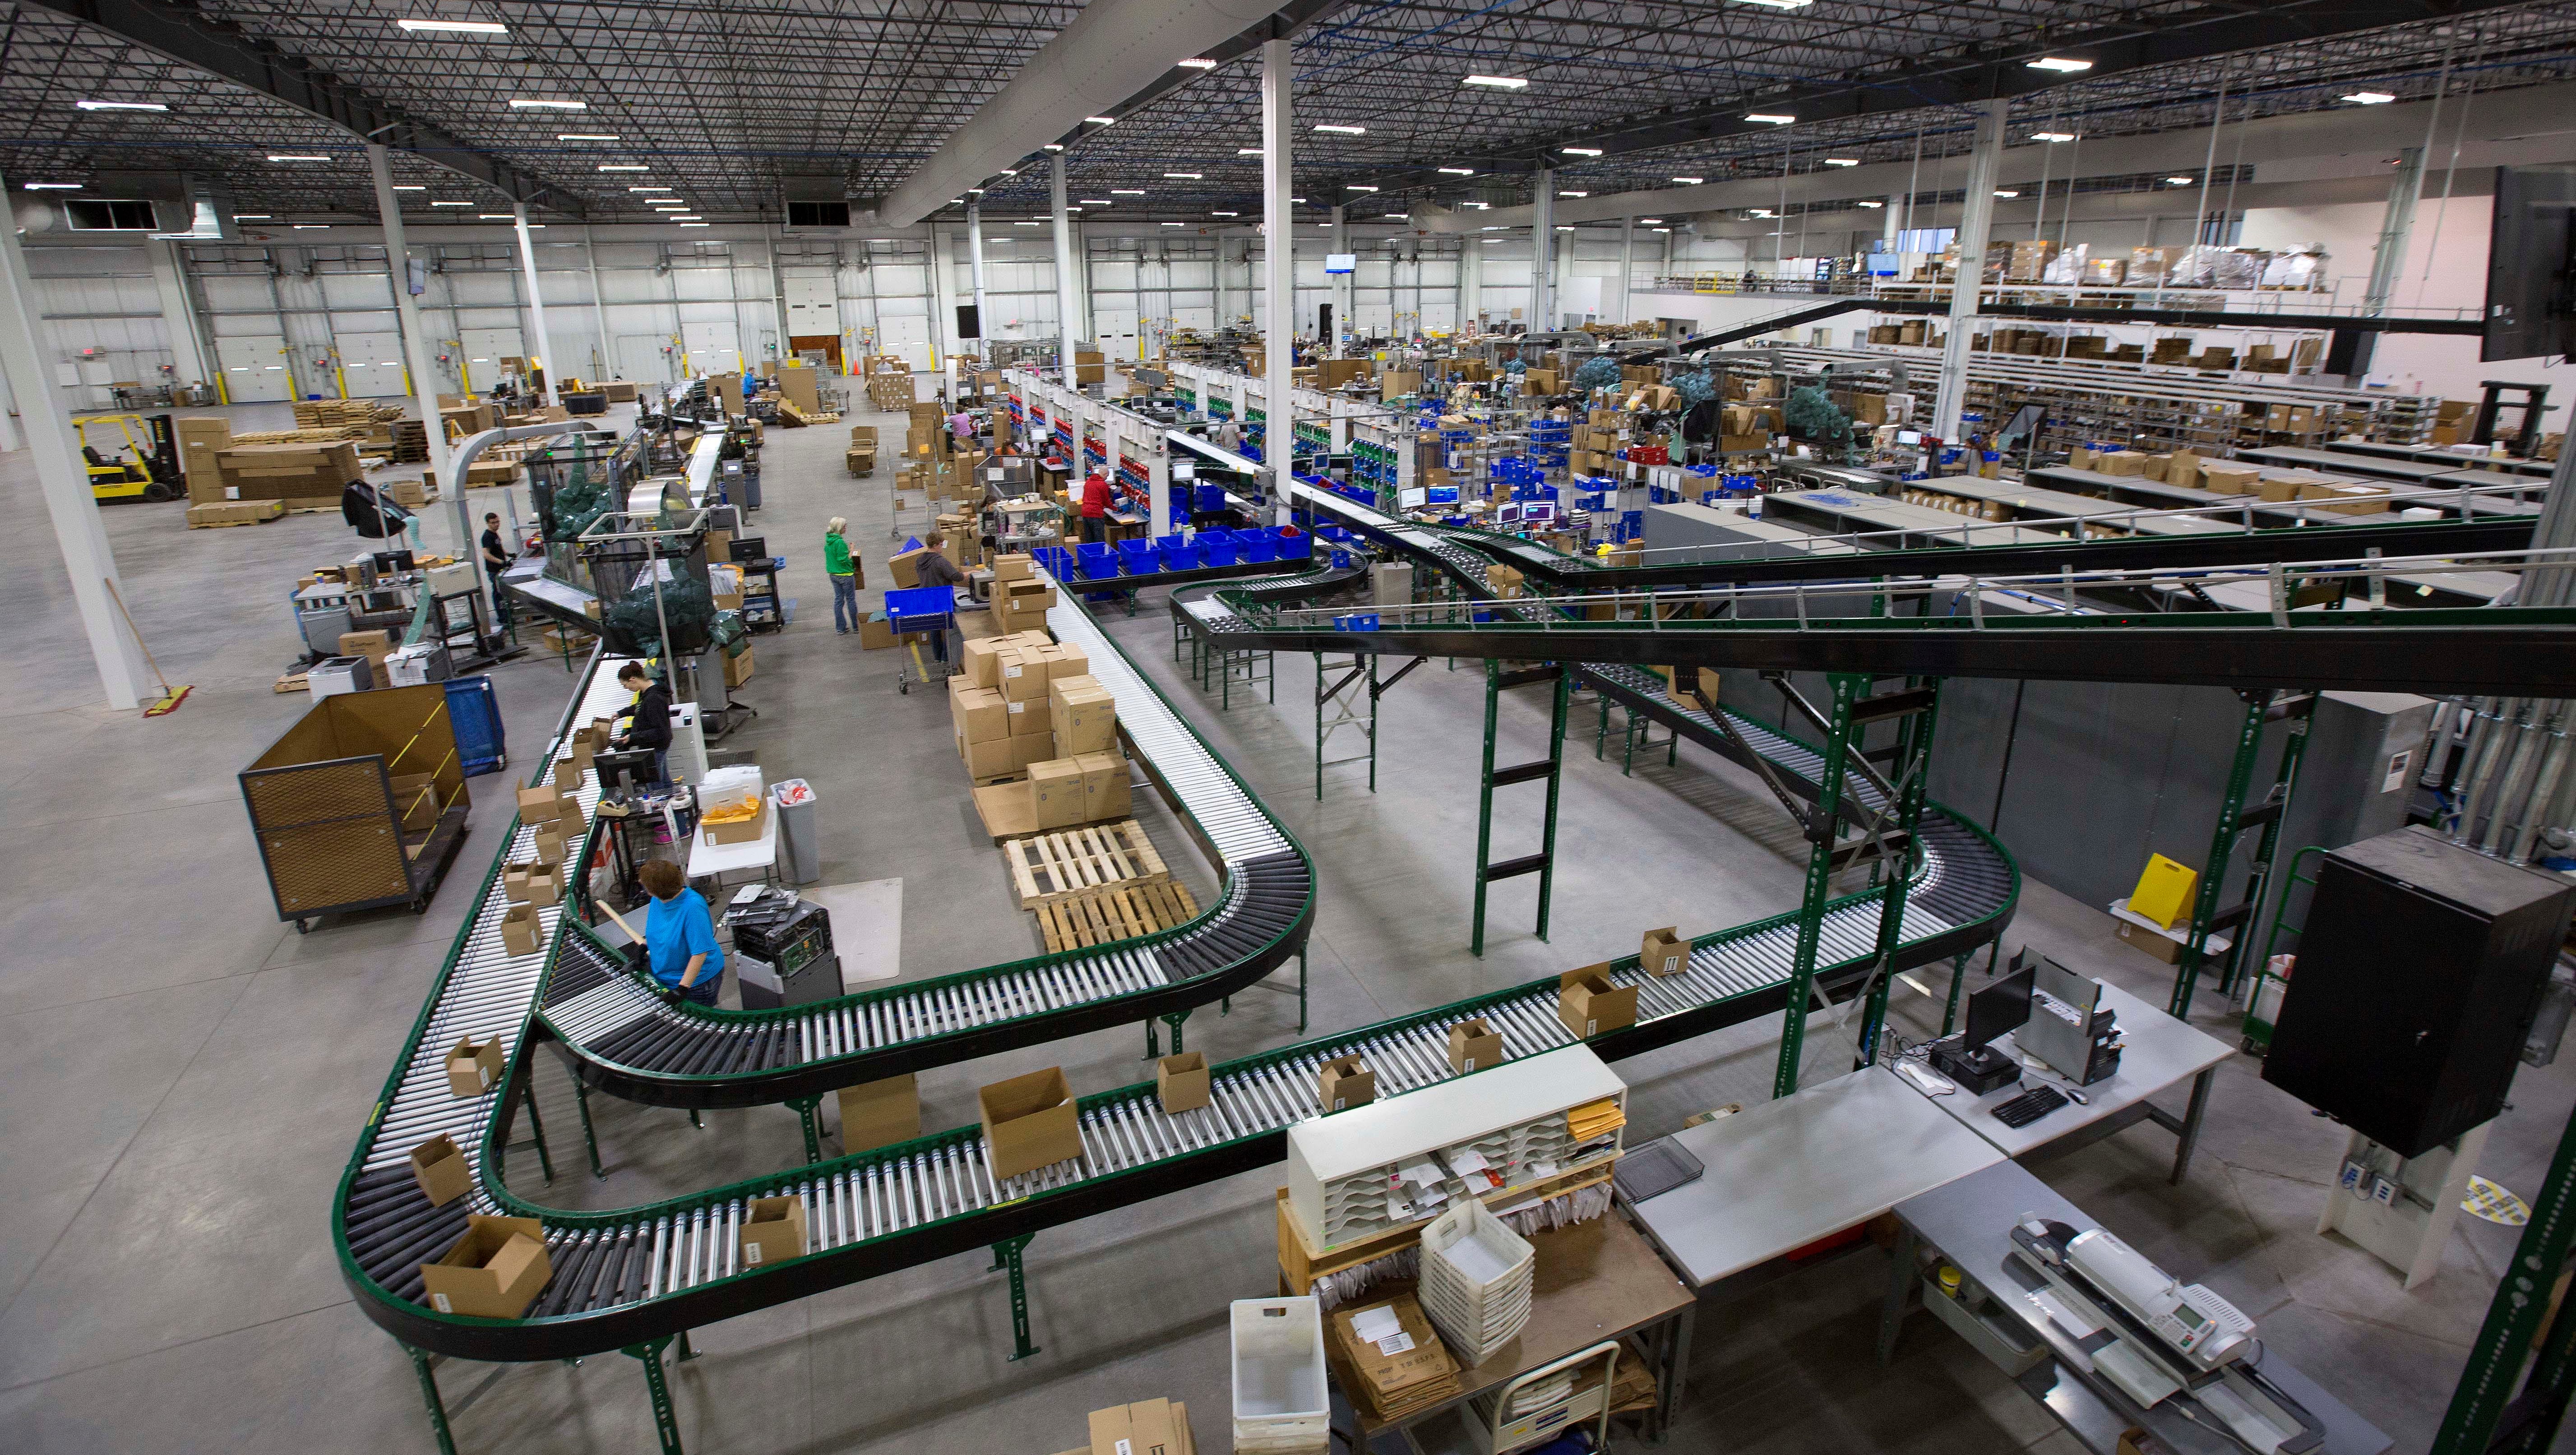 Workers fulfill online and mail orders in a 200,000-square-foot warehouse at Brownells in Grinnel.